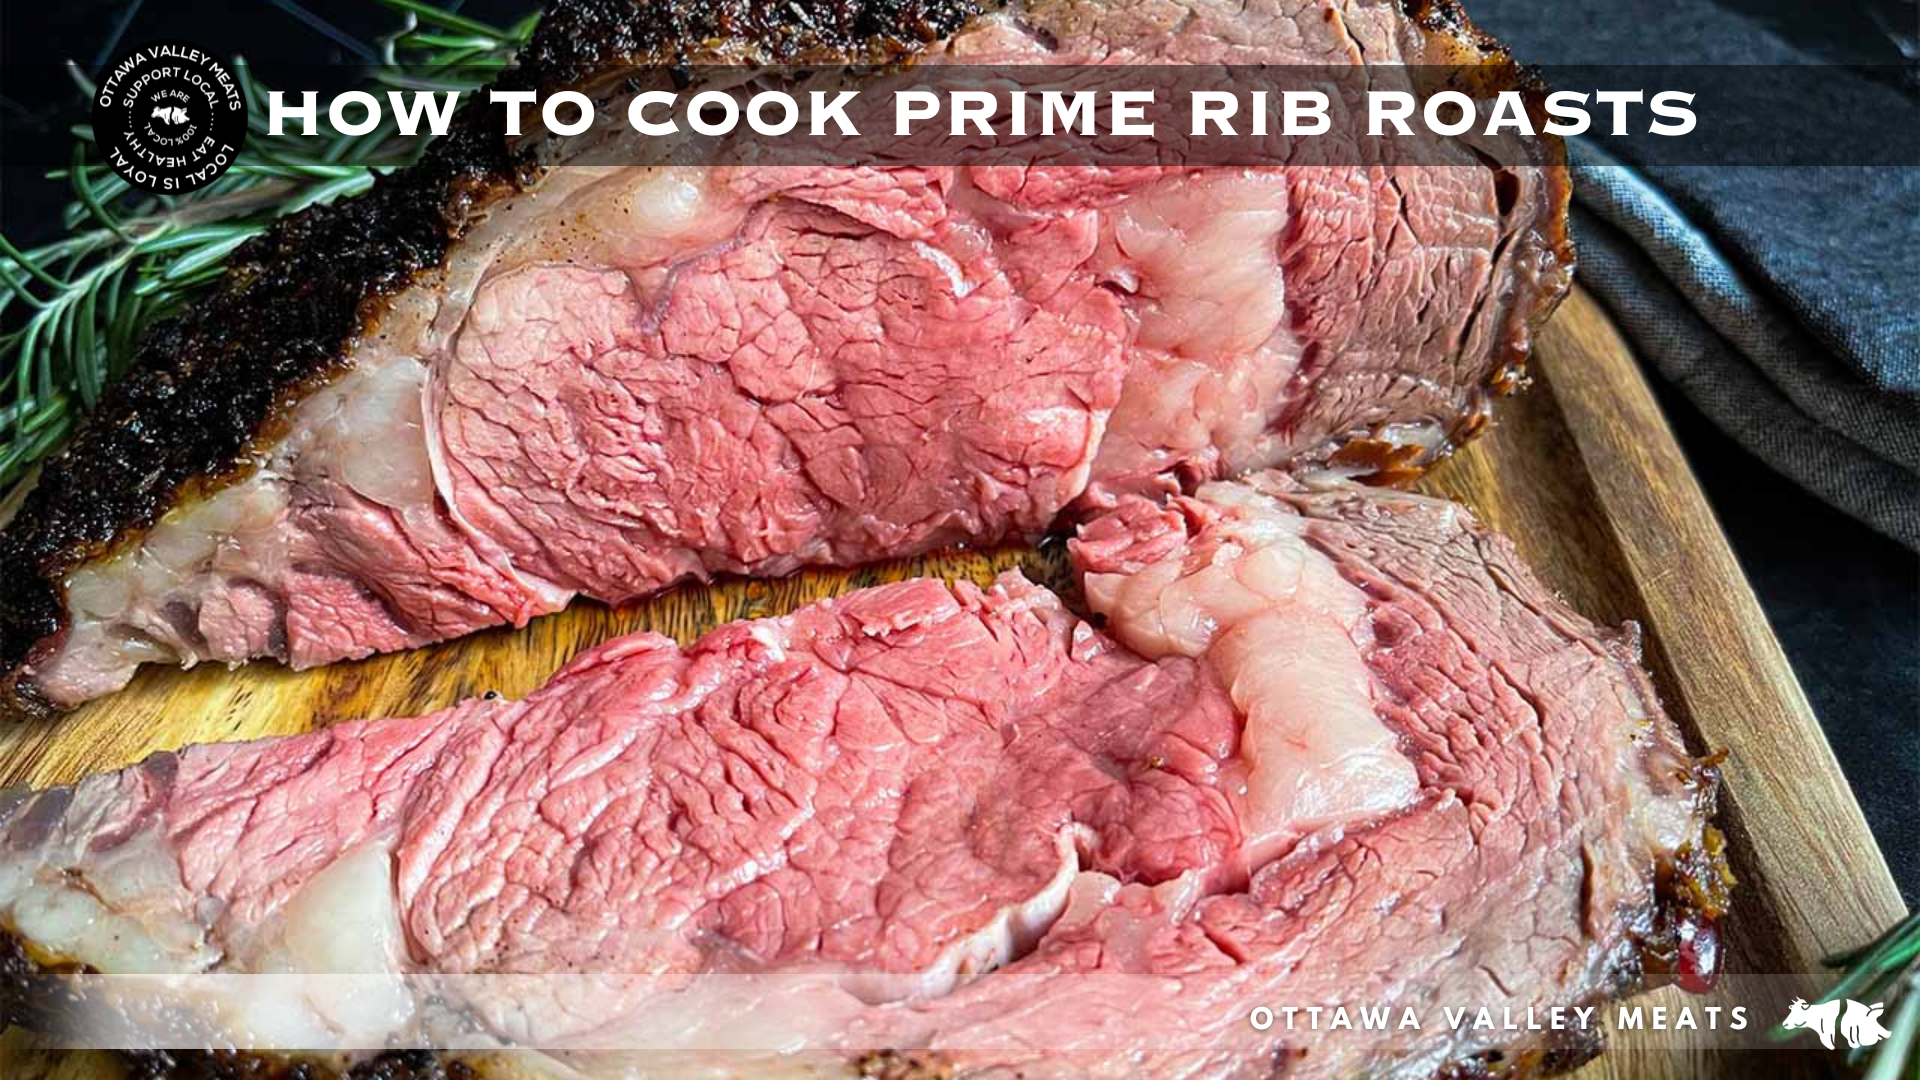 How To Cook Prime Rib Roasts